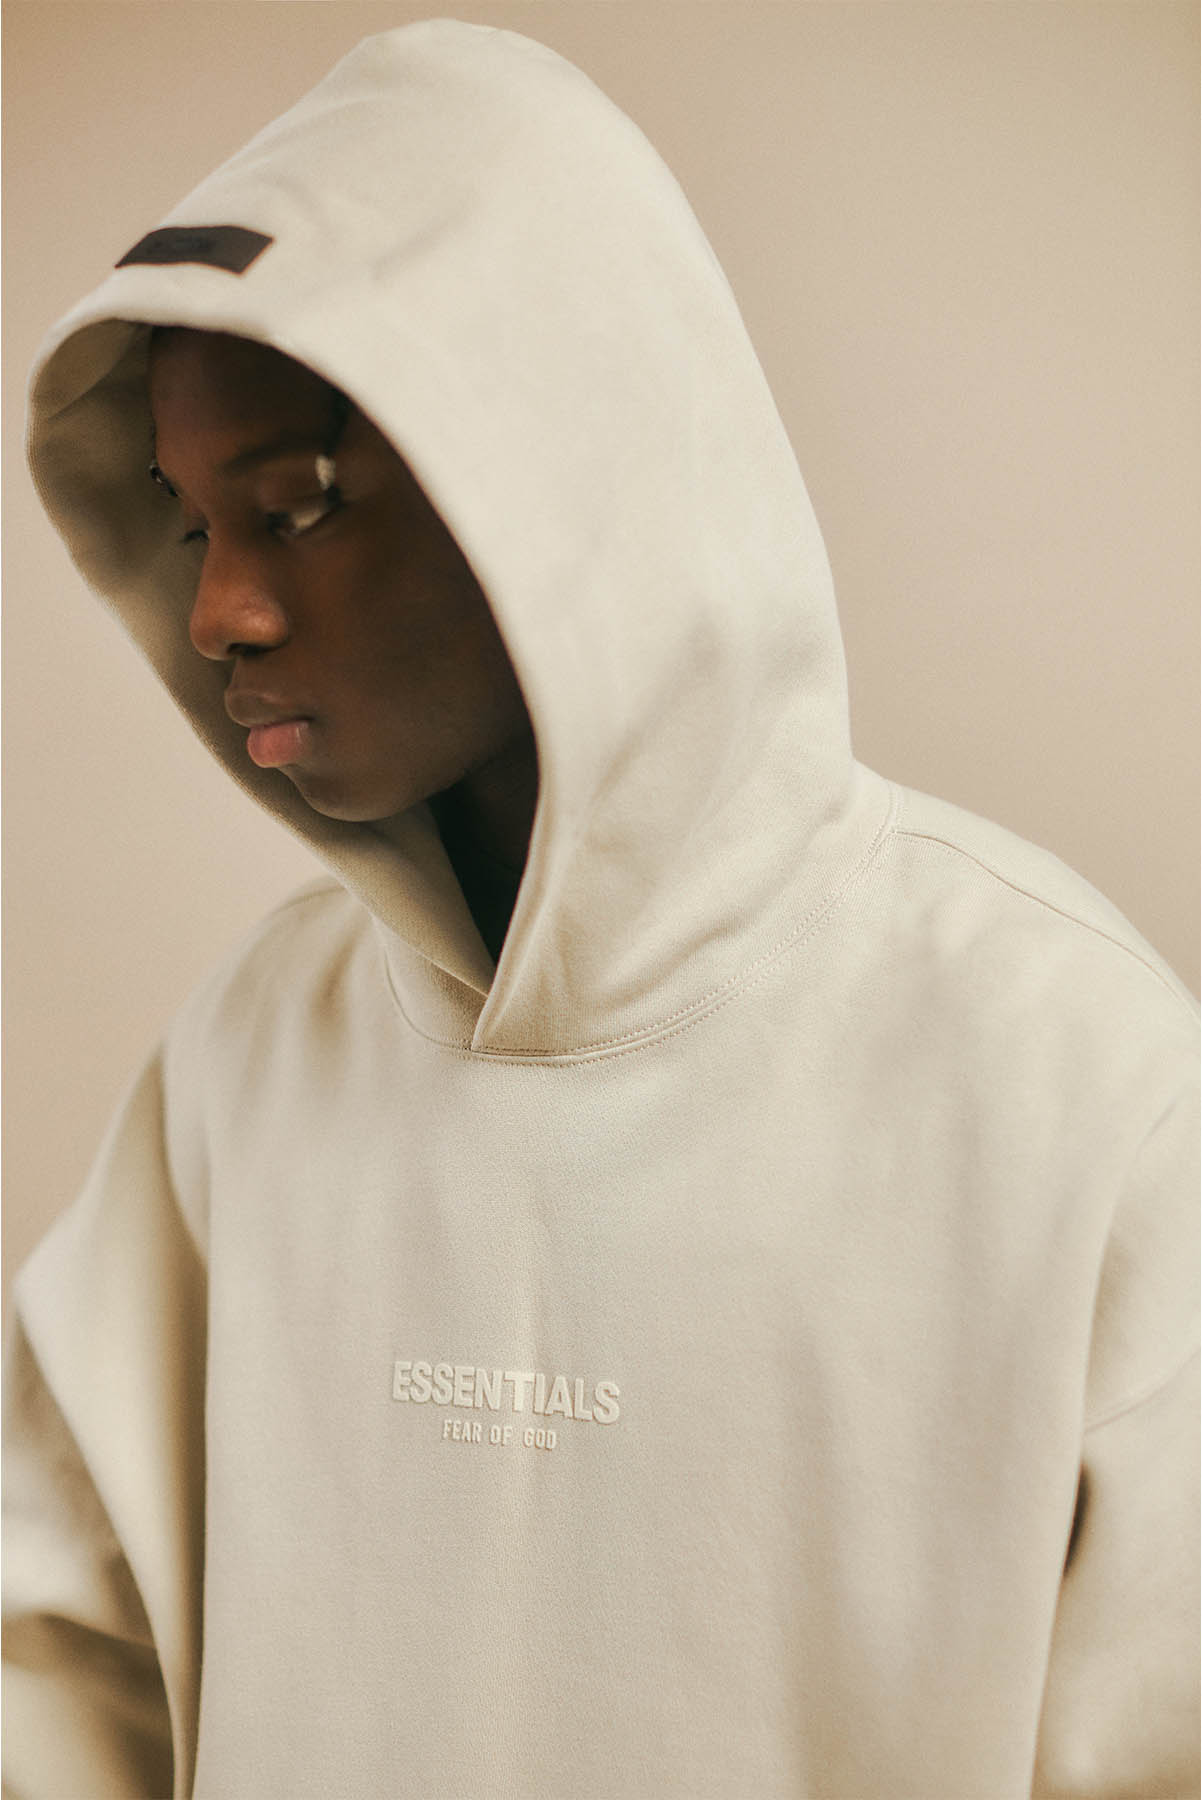 END. (SG) Features | FEAR OF GOD ESSENTIALS SS22 DROP 3 | END. (SG)